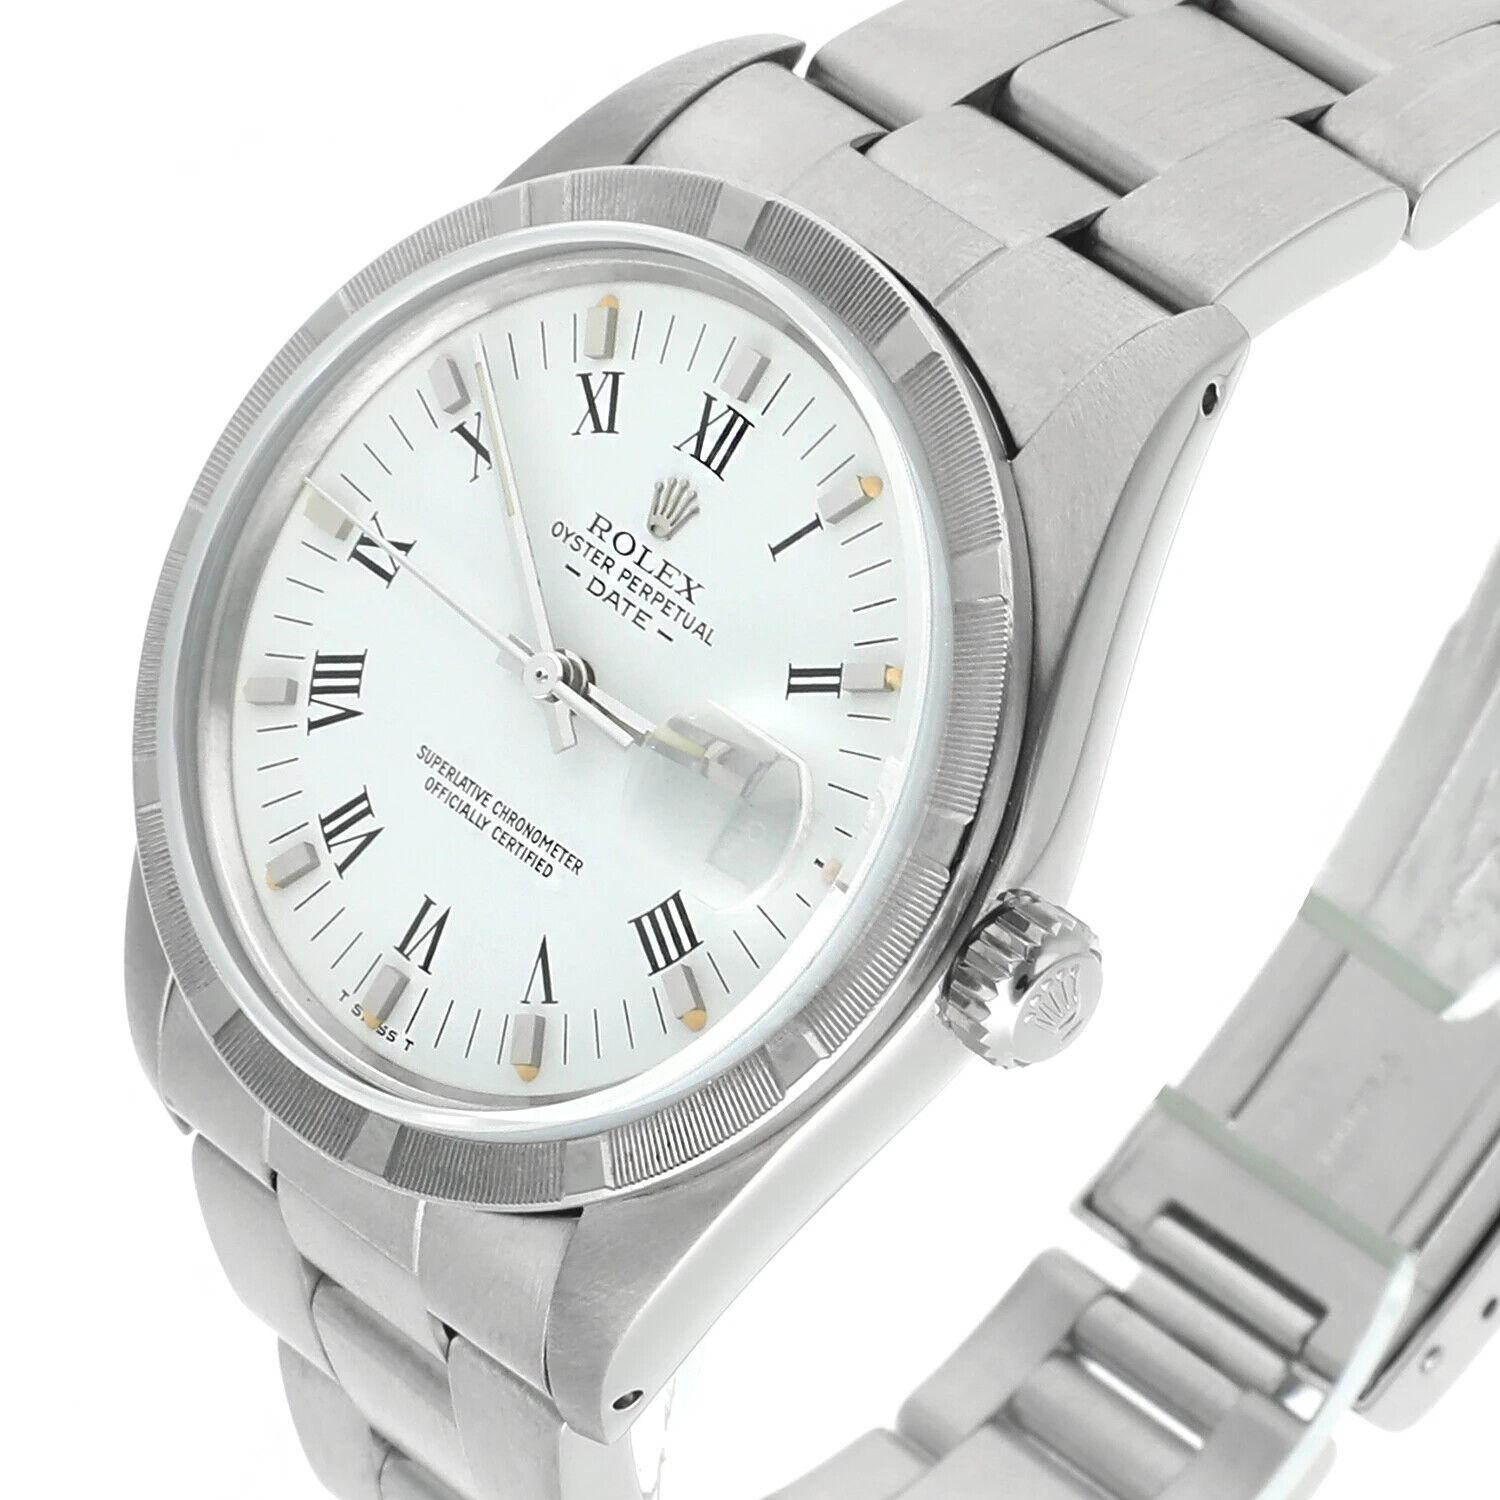 Unisex Rolex Date Stainless Steel Watch Oyster White Roman Dial 15010 Circa 1988. This watch has been professionally polished, serviced and is in excellent overall condition. There are absolutely no visible scratches or blemishes. All parts are 100%